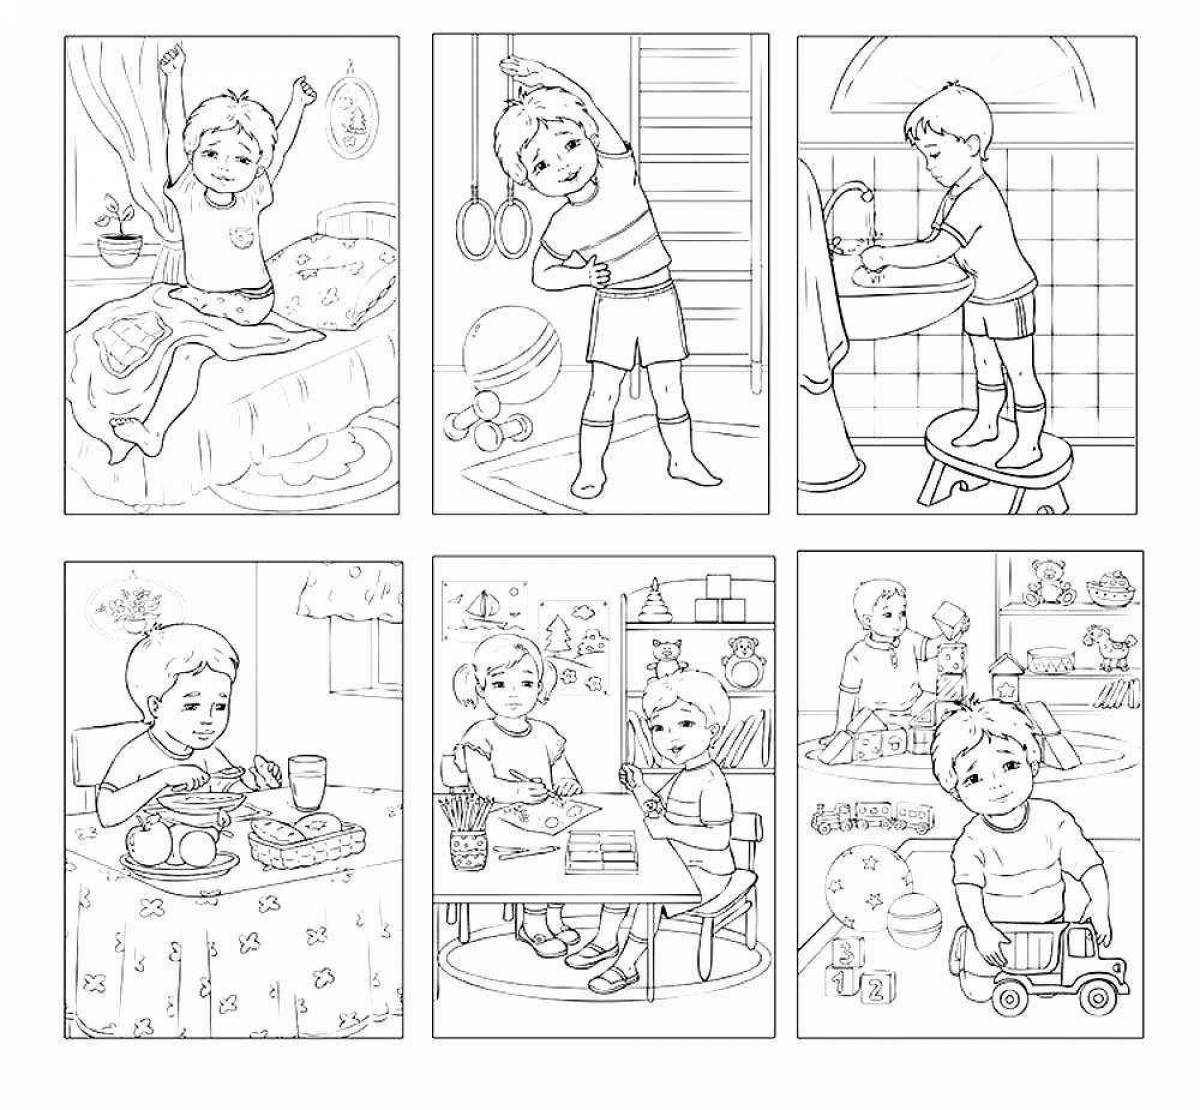 Coloring template with colored texture for 2nd grade students